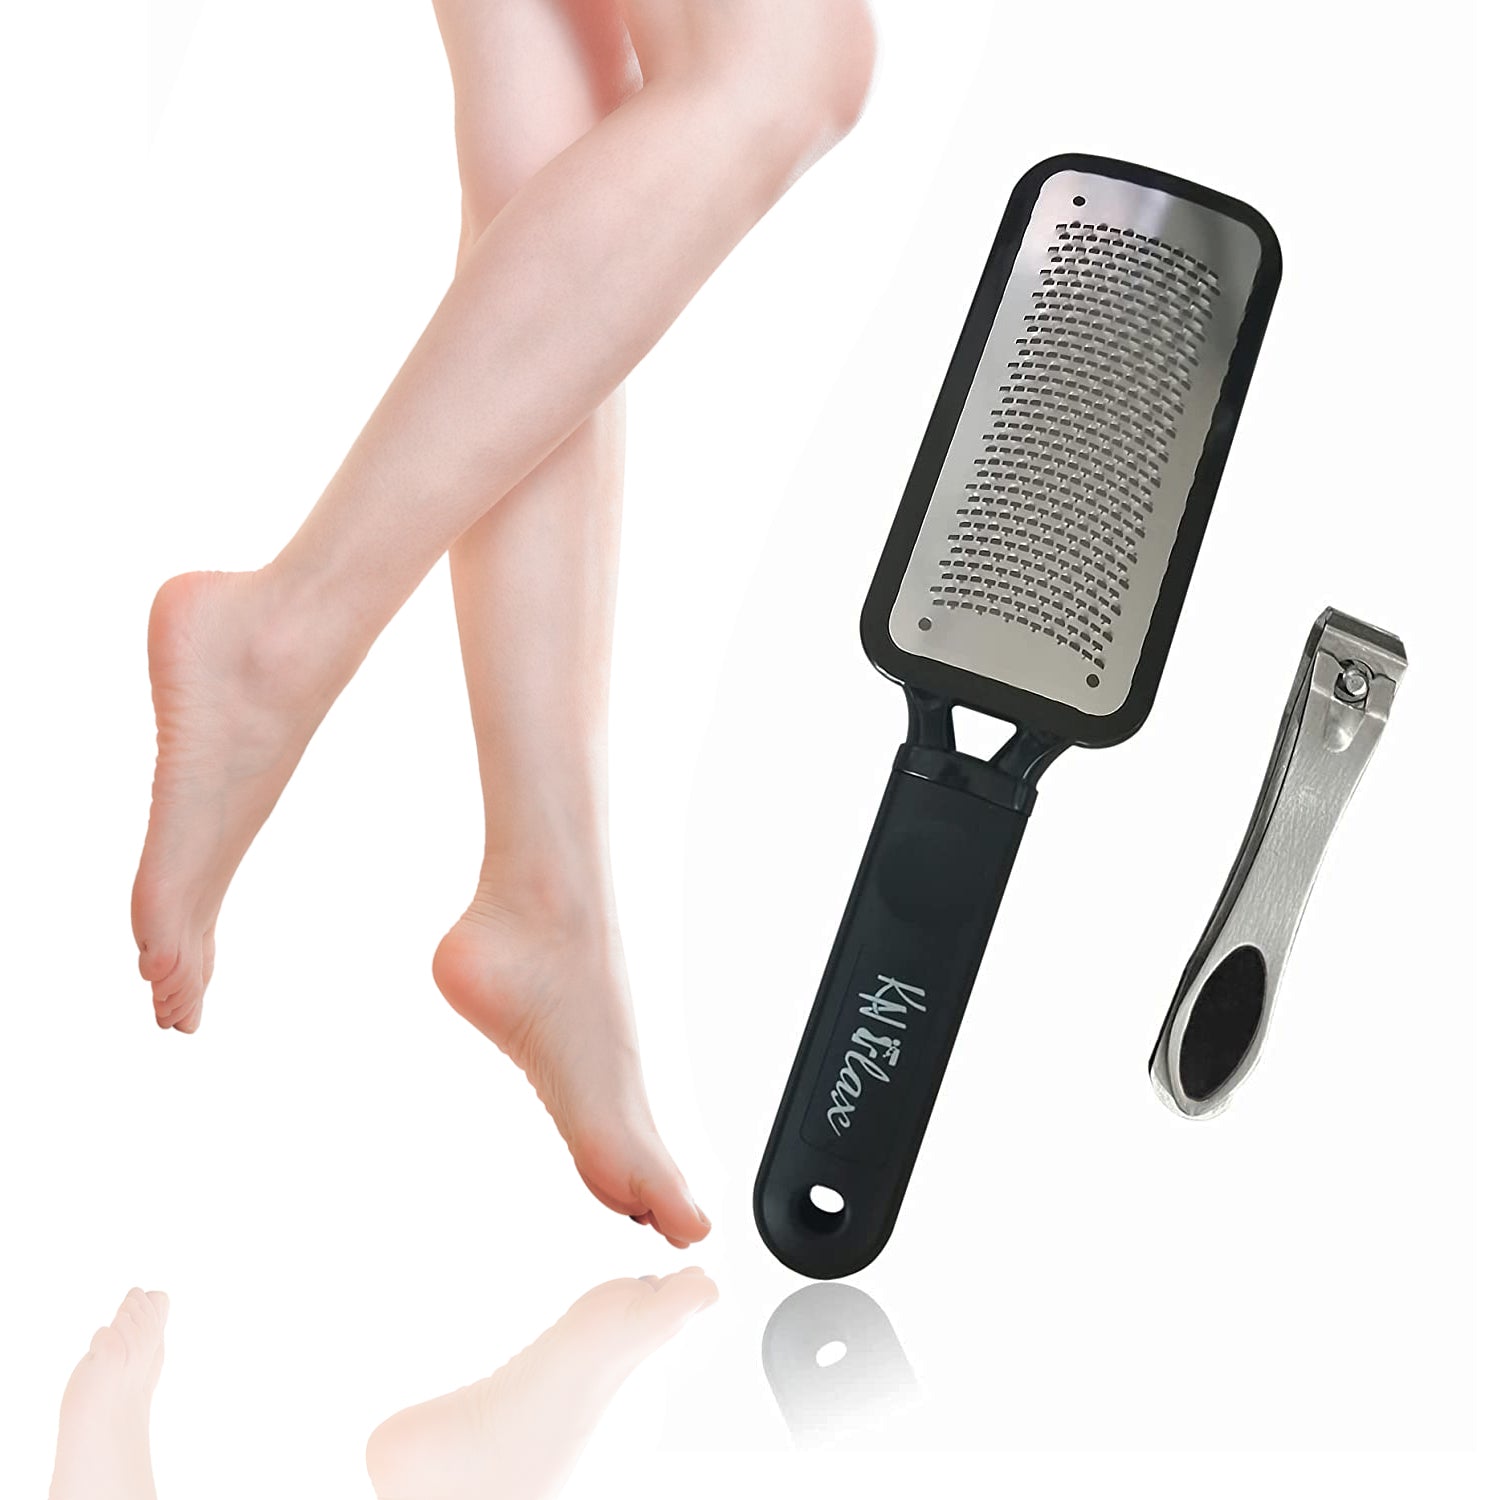 Rikans Colossal Foot rasp Foot File and Callus Remover. Best Foot